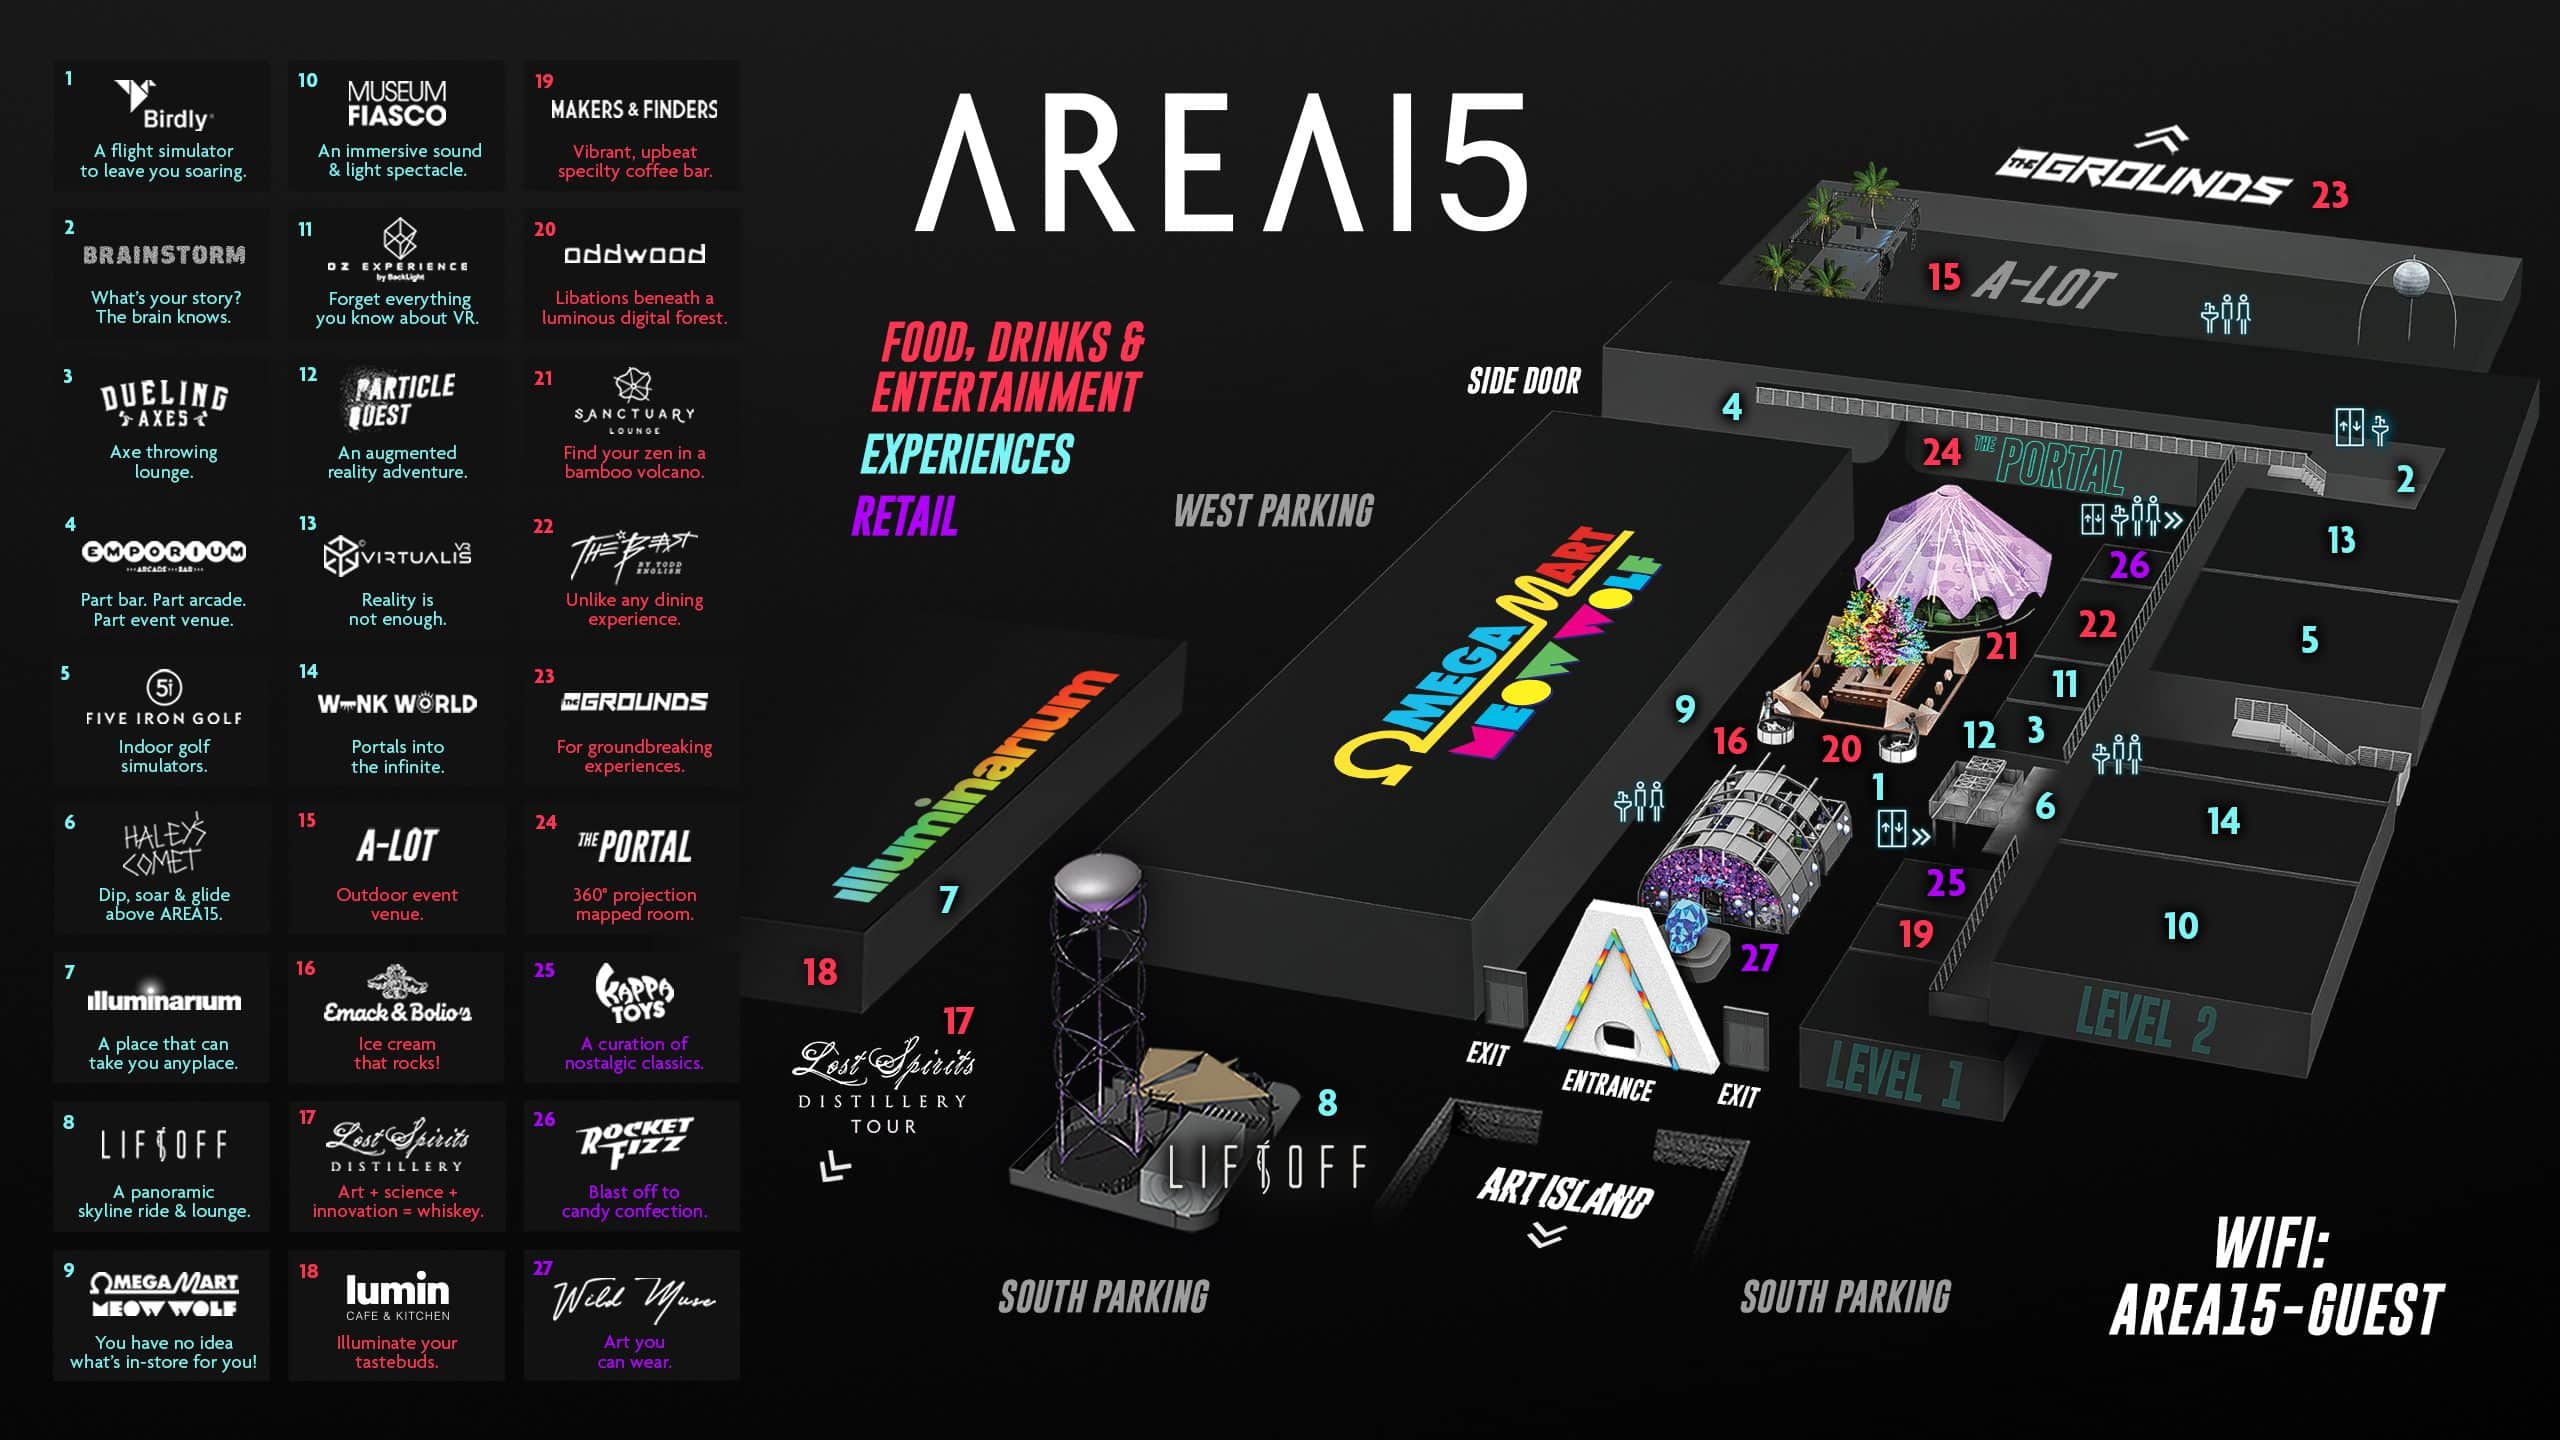 Map of Area15 highlighting different areas.